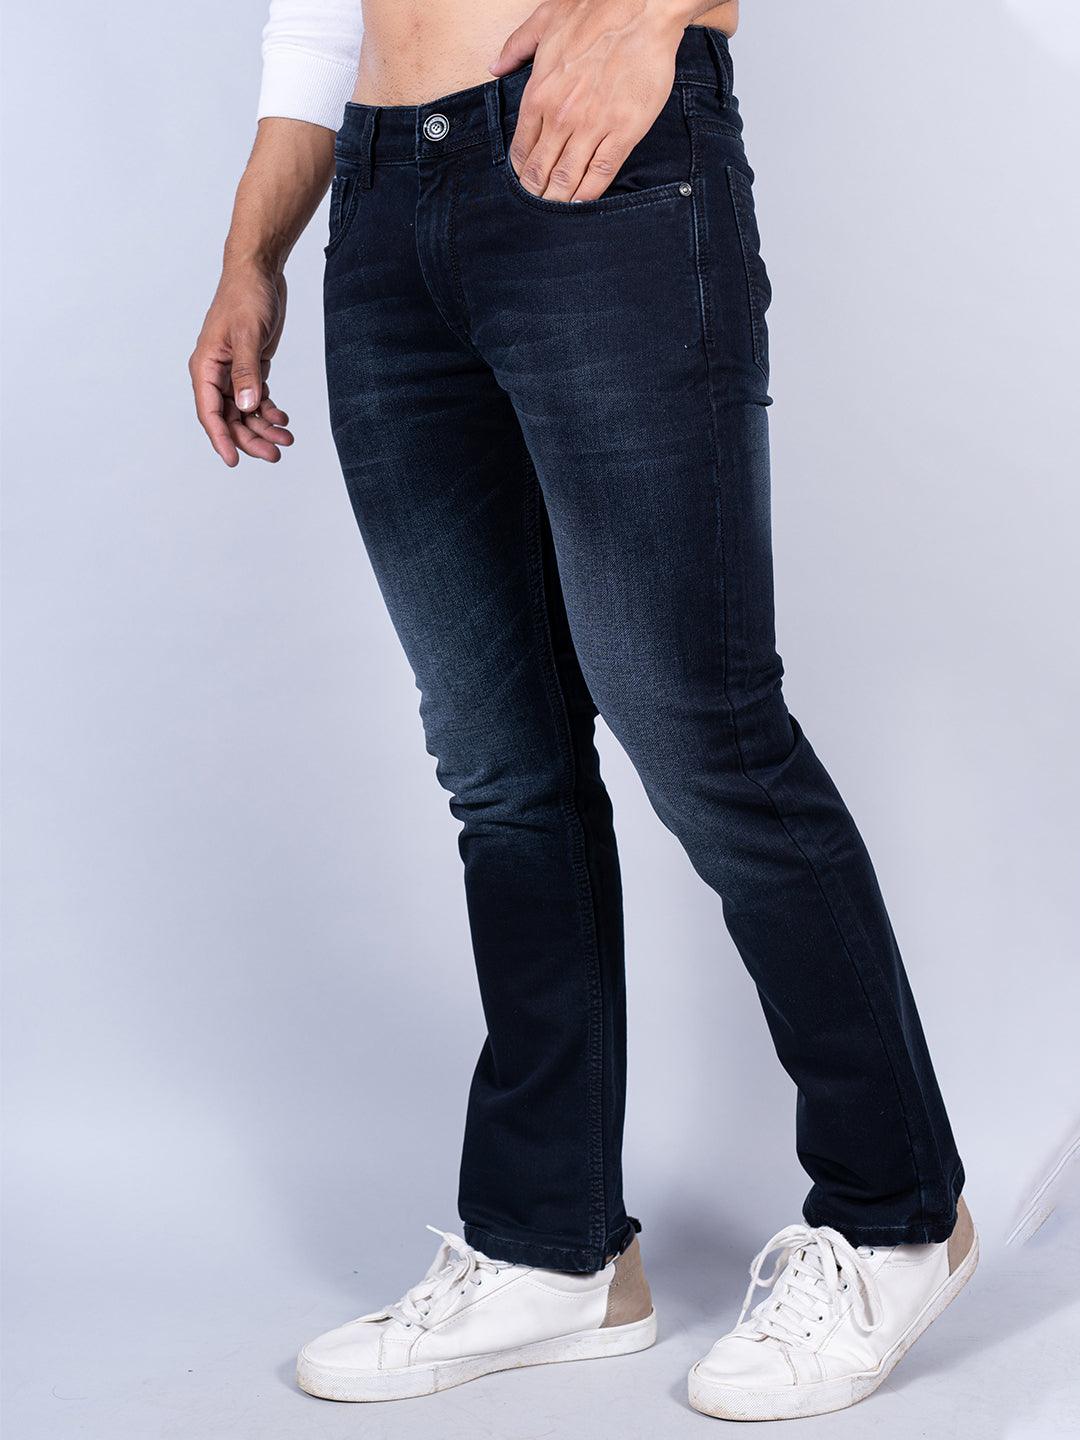 Black Boot-cut Stretchable Mens Jeans